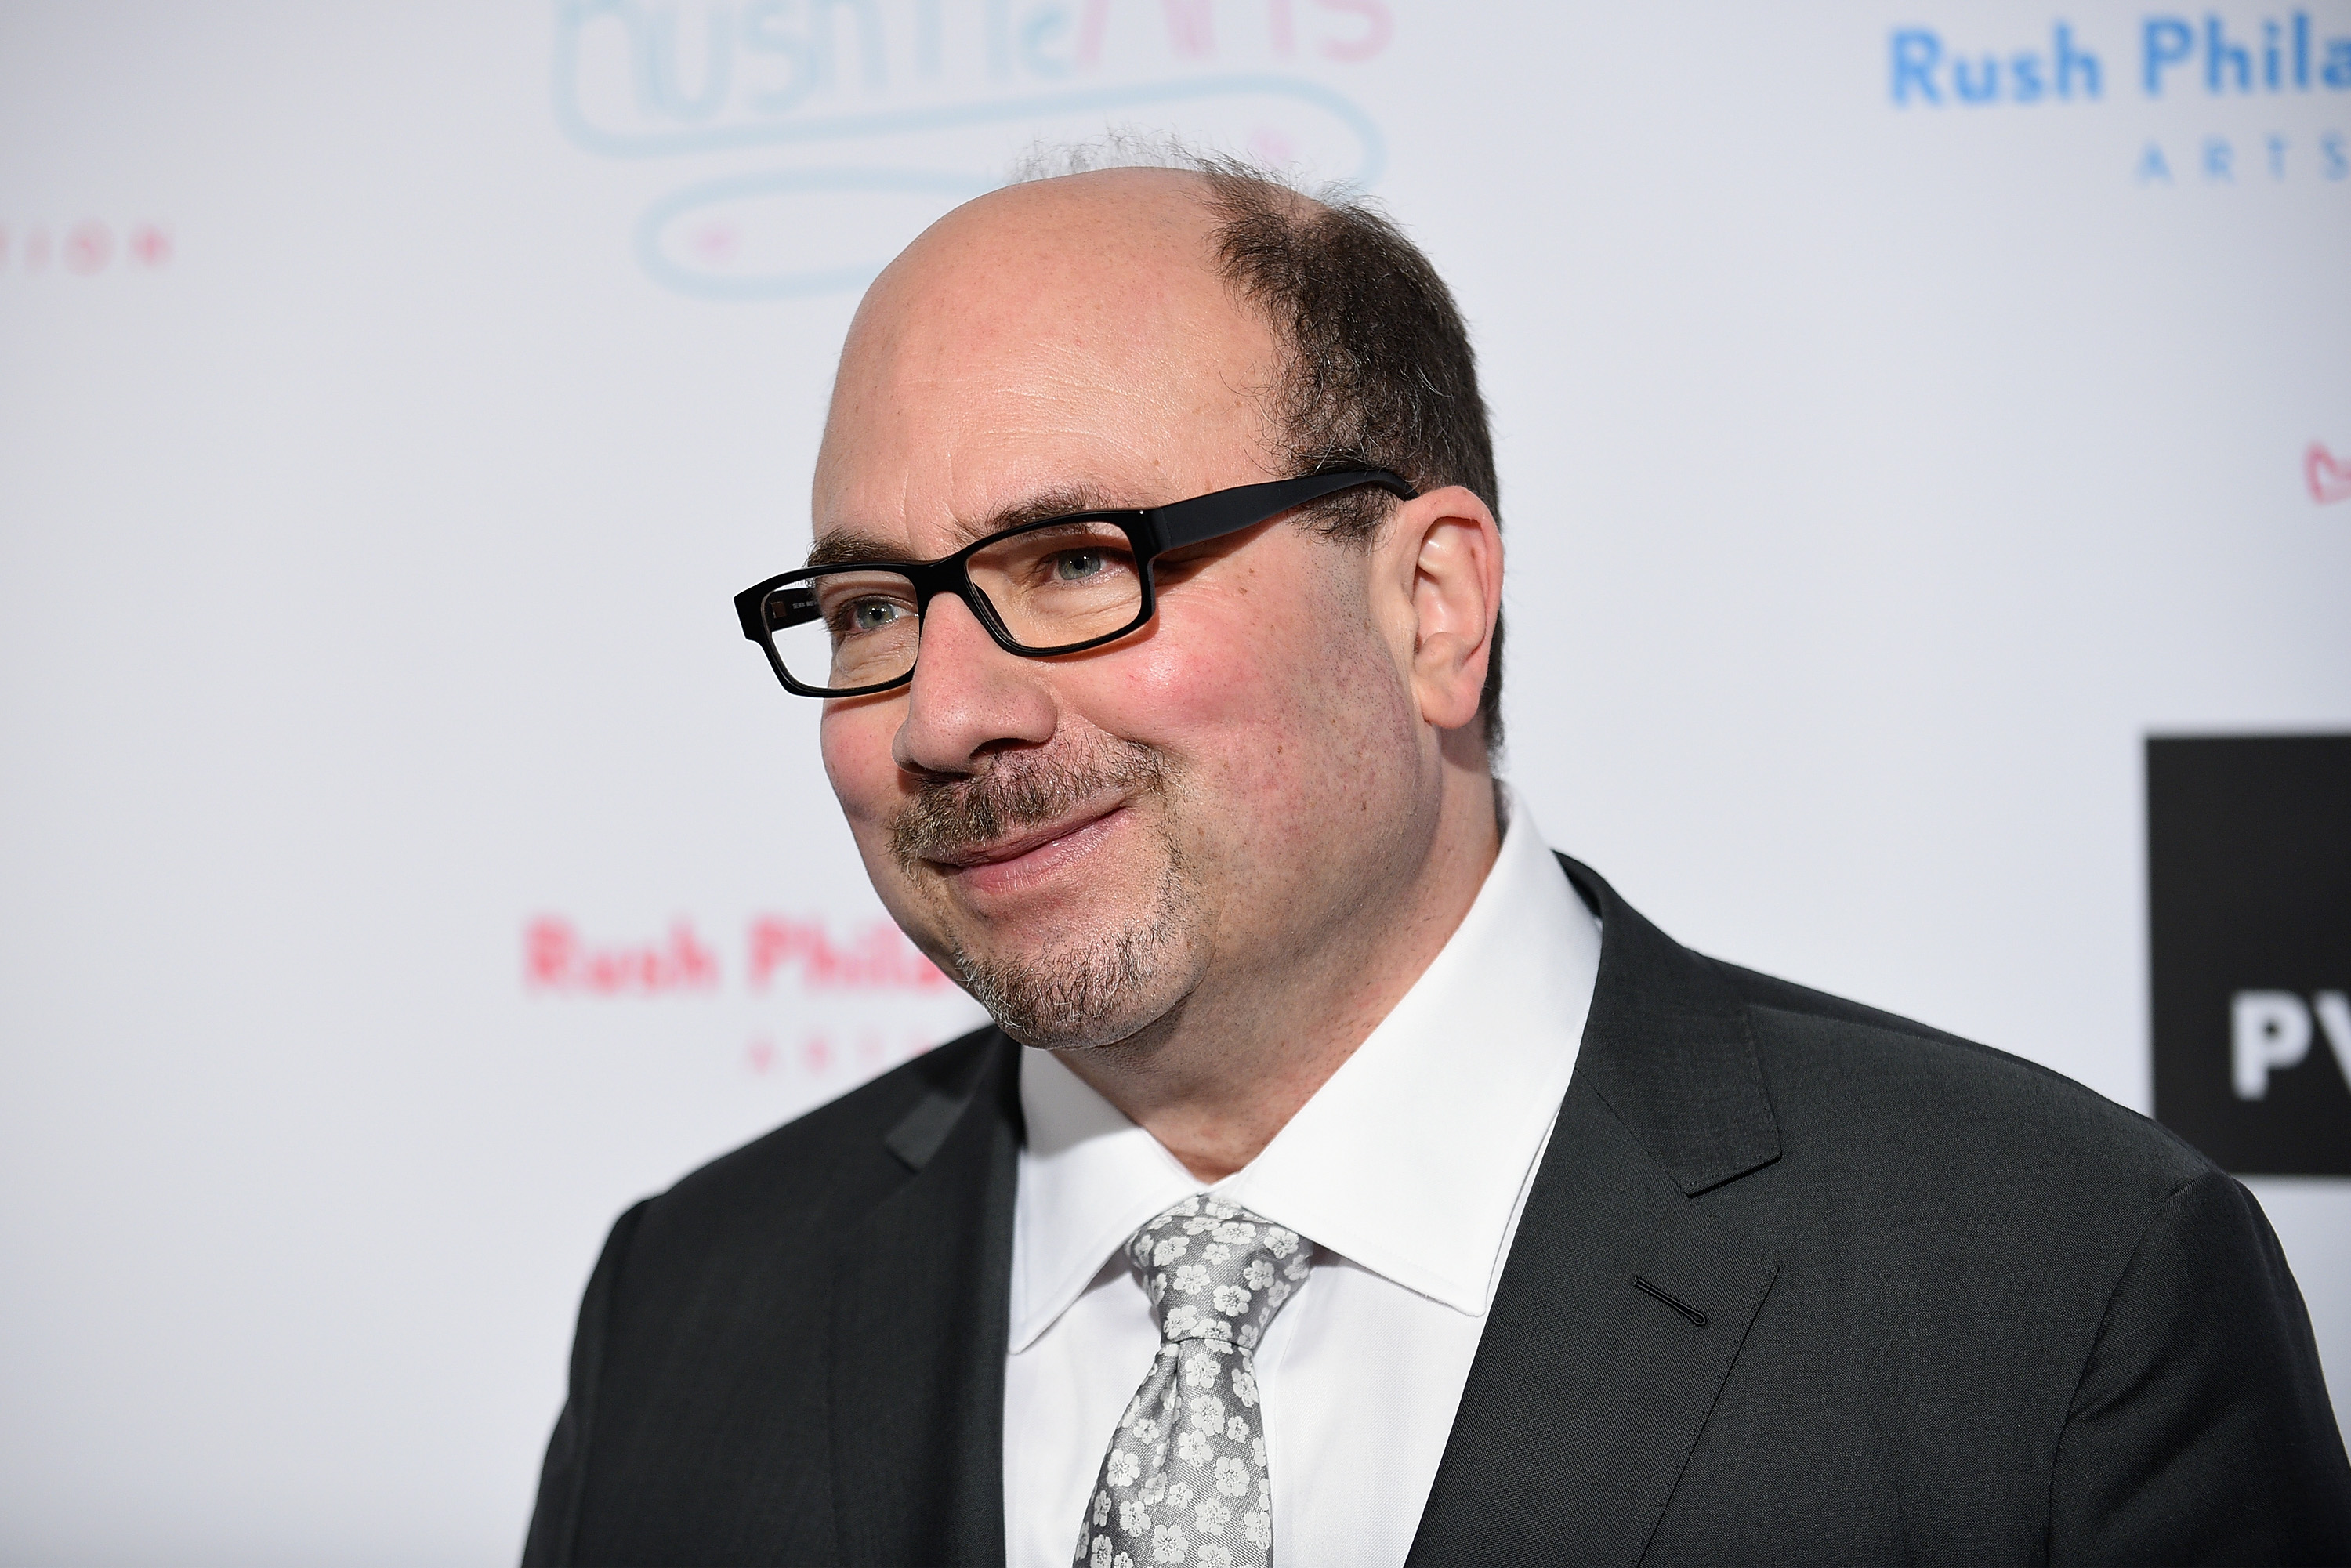 NEW YORK, NY - MARCH 11:  Founder of craigslist and craigconnects Craig Newmark attends Russell Simmons' Rush Philanthropic Arts Foundation's Annual Rush HeARTS Education Luncheon at The Plaza Hotel on March 11, 2016 (Bryan Bedder — Getty Images for Rush Philanthropic Arts Foundation)